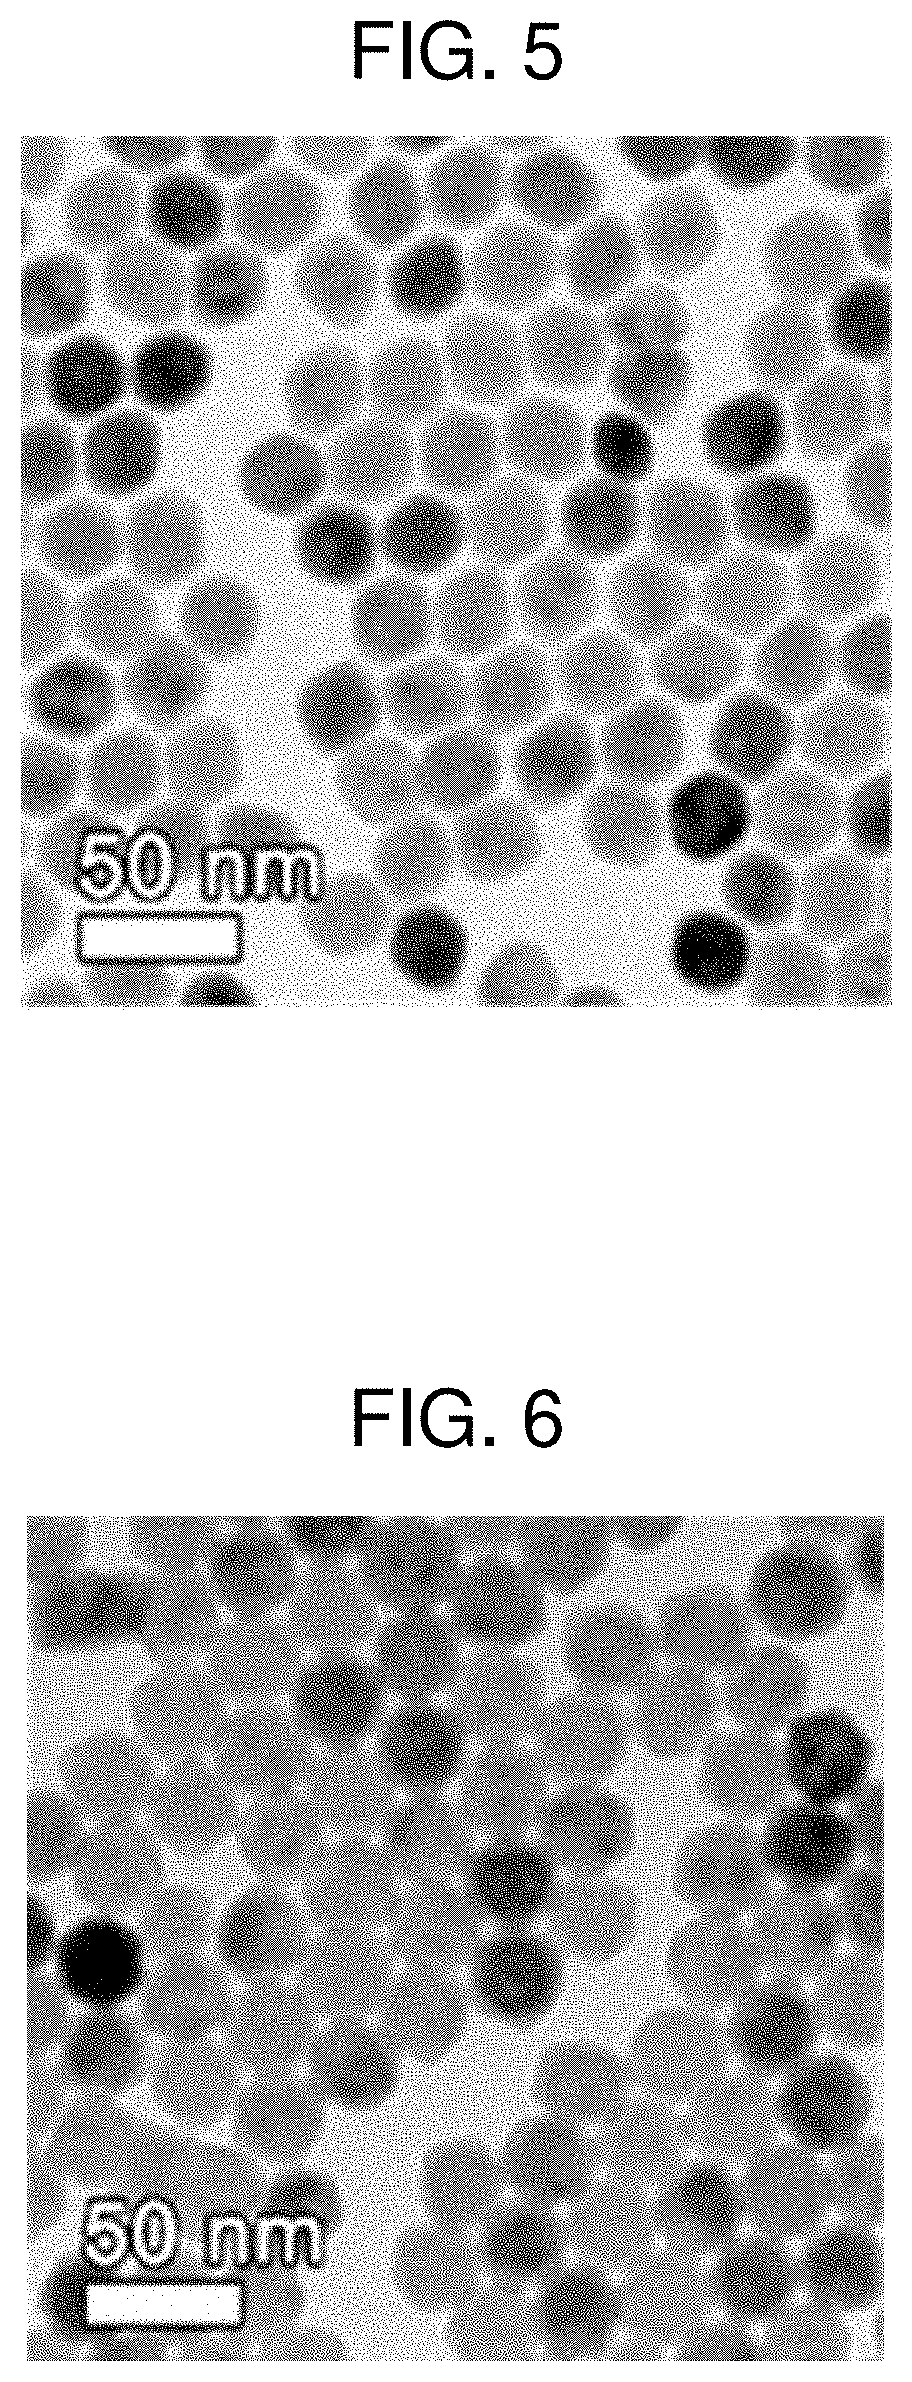 Full-color-tunable upconversion nanophosphor